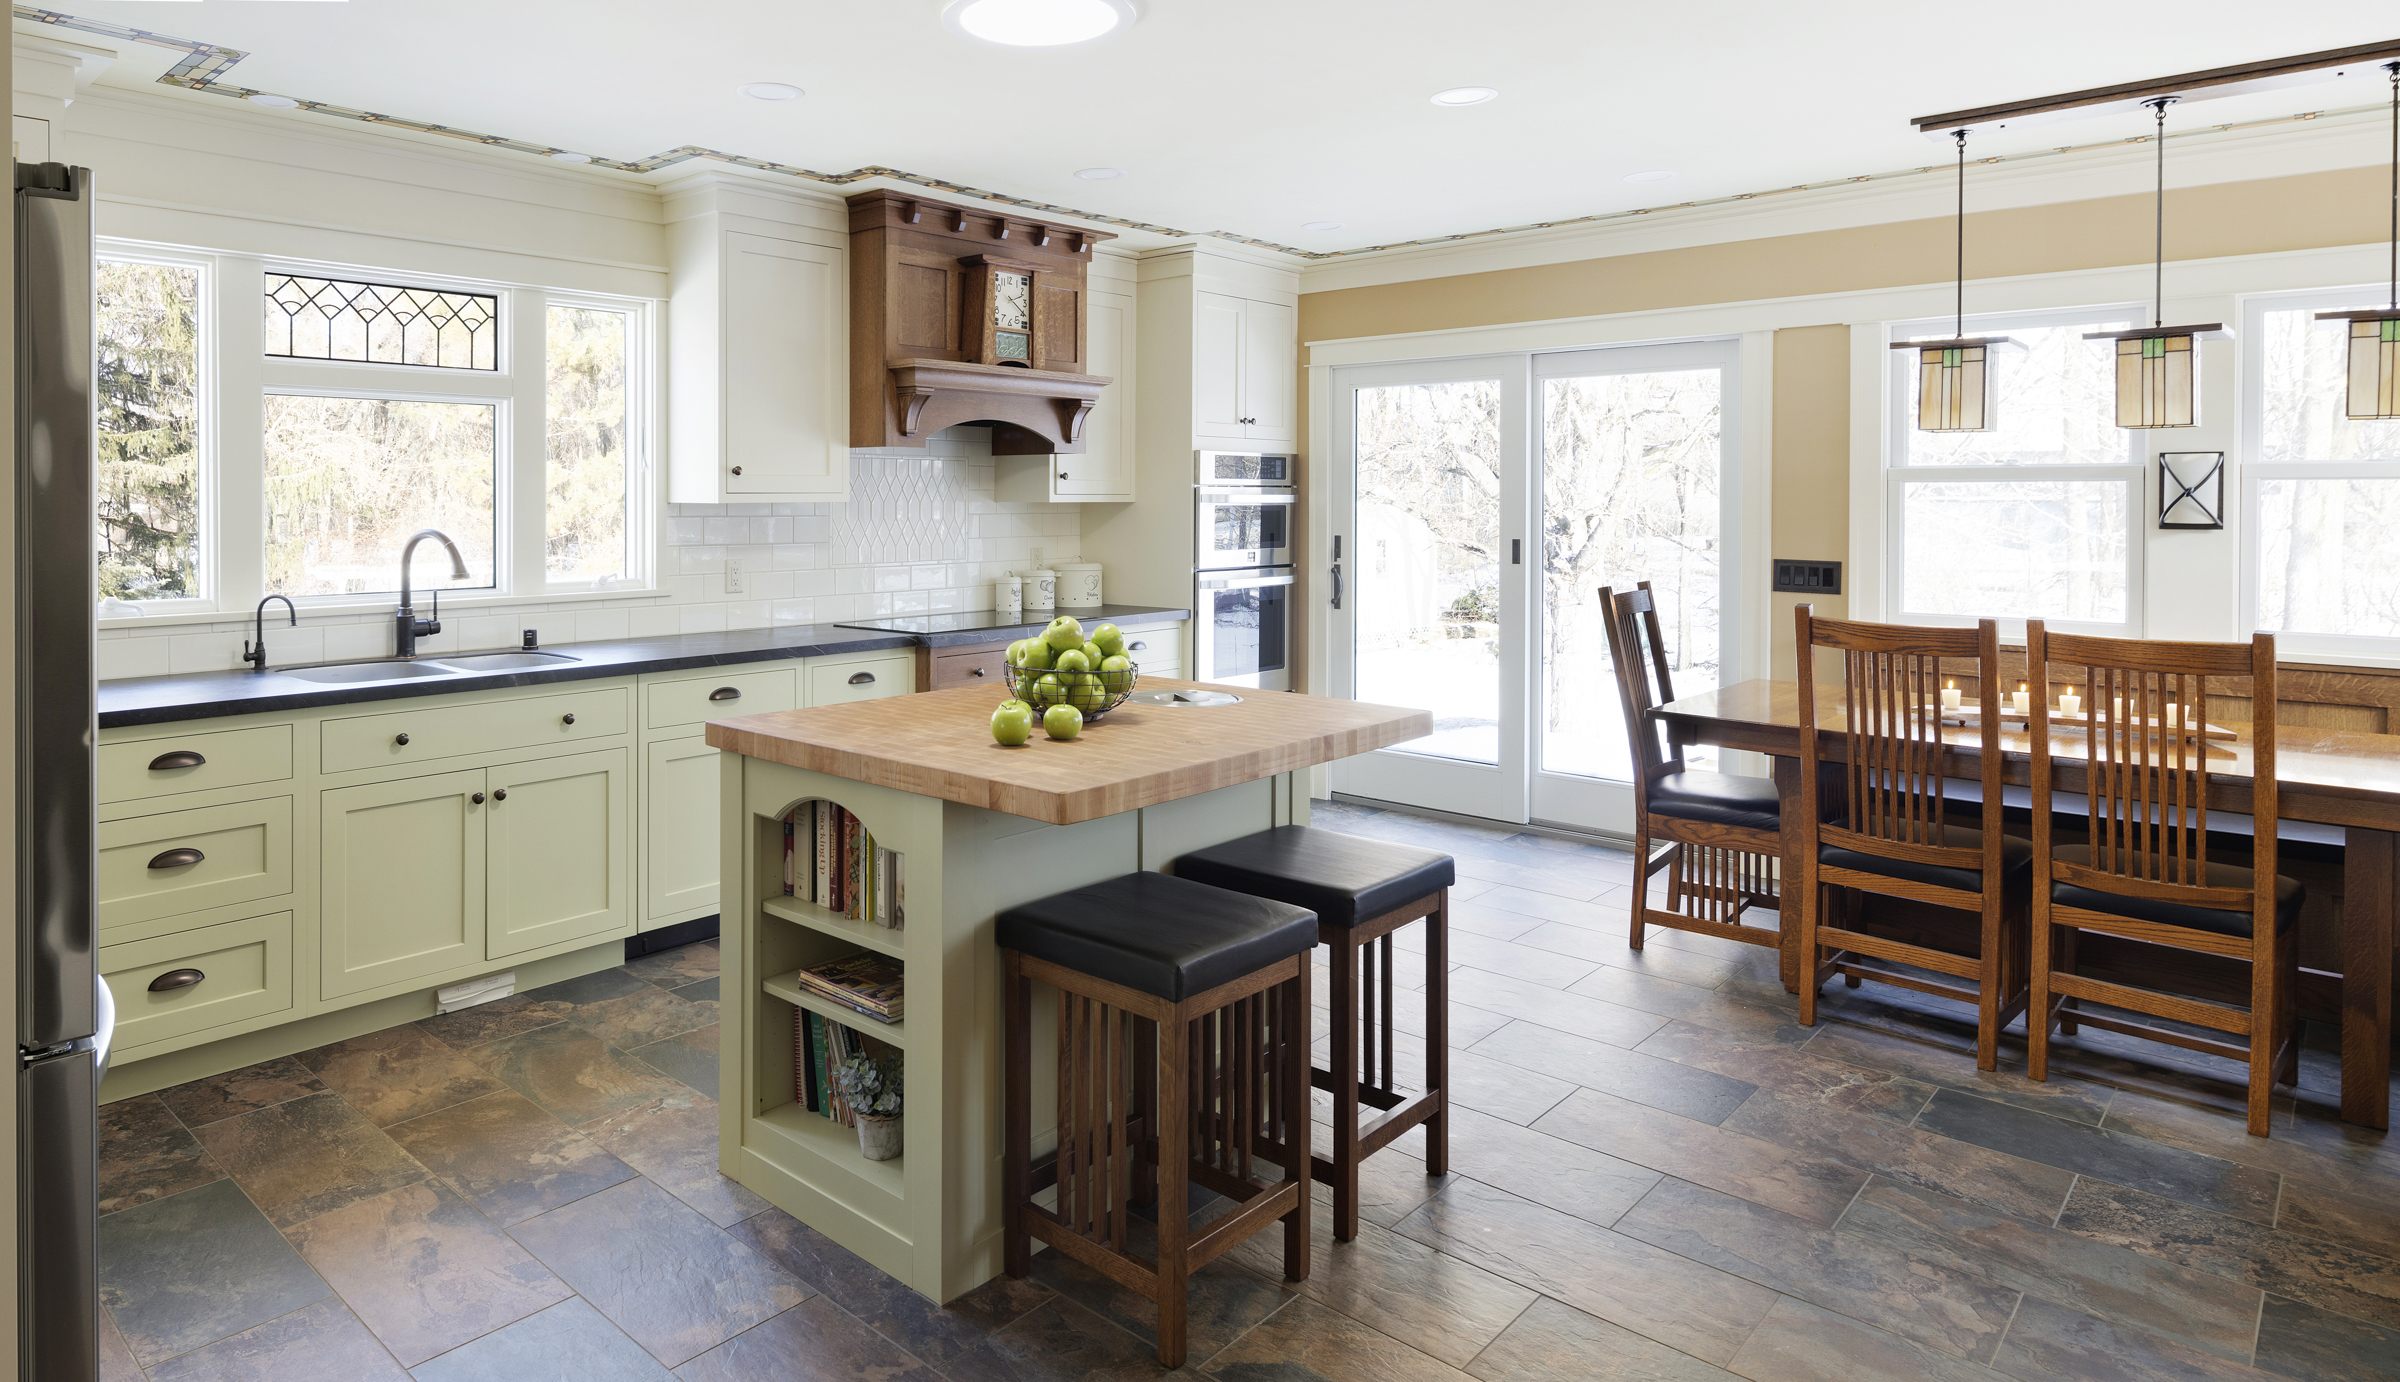 Craftsman kitchen remodel with butcher block island, built in dining seating, and double glass sliding doors